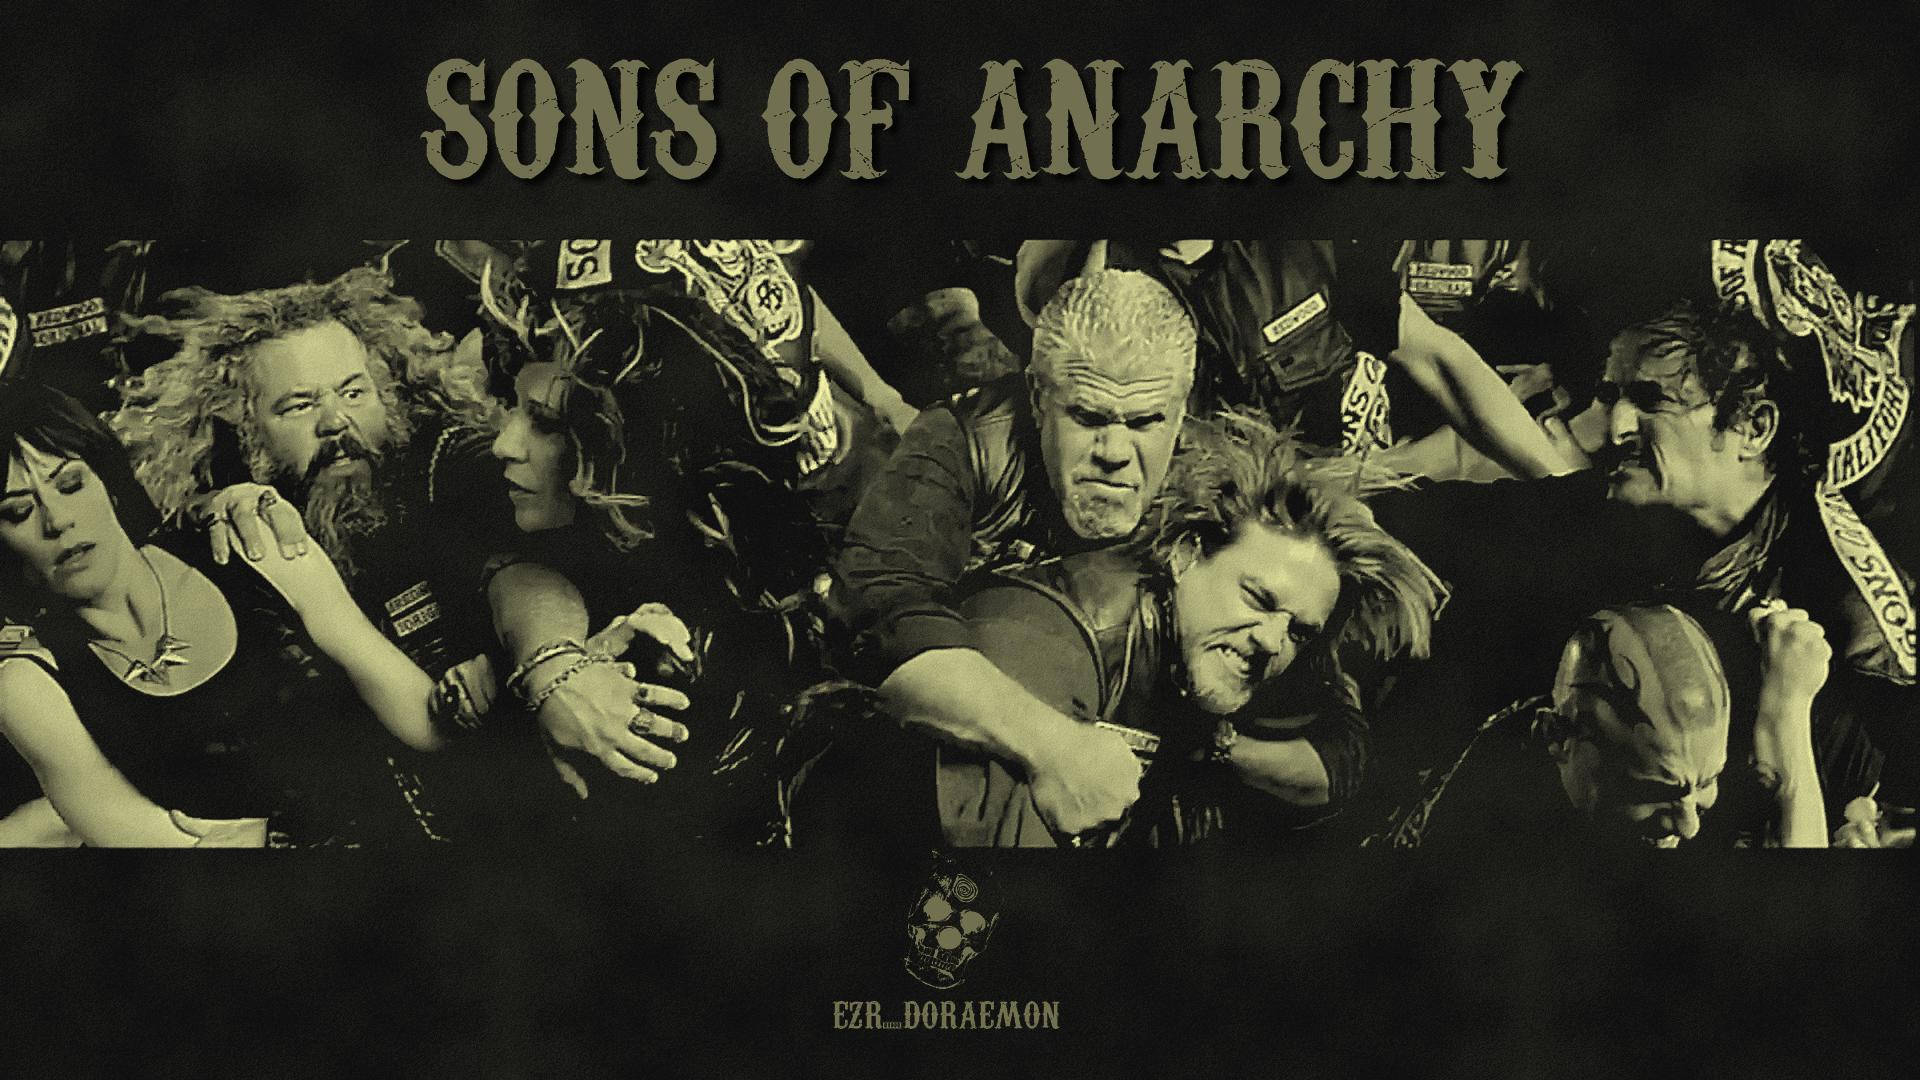 The Cast Of Sons Of Anarchy In All Its Glory